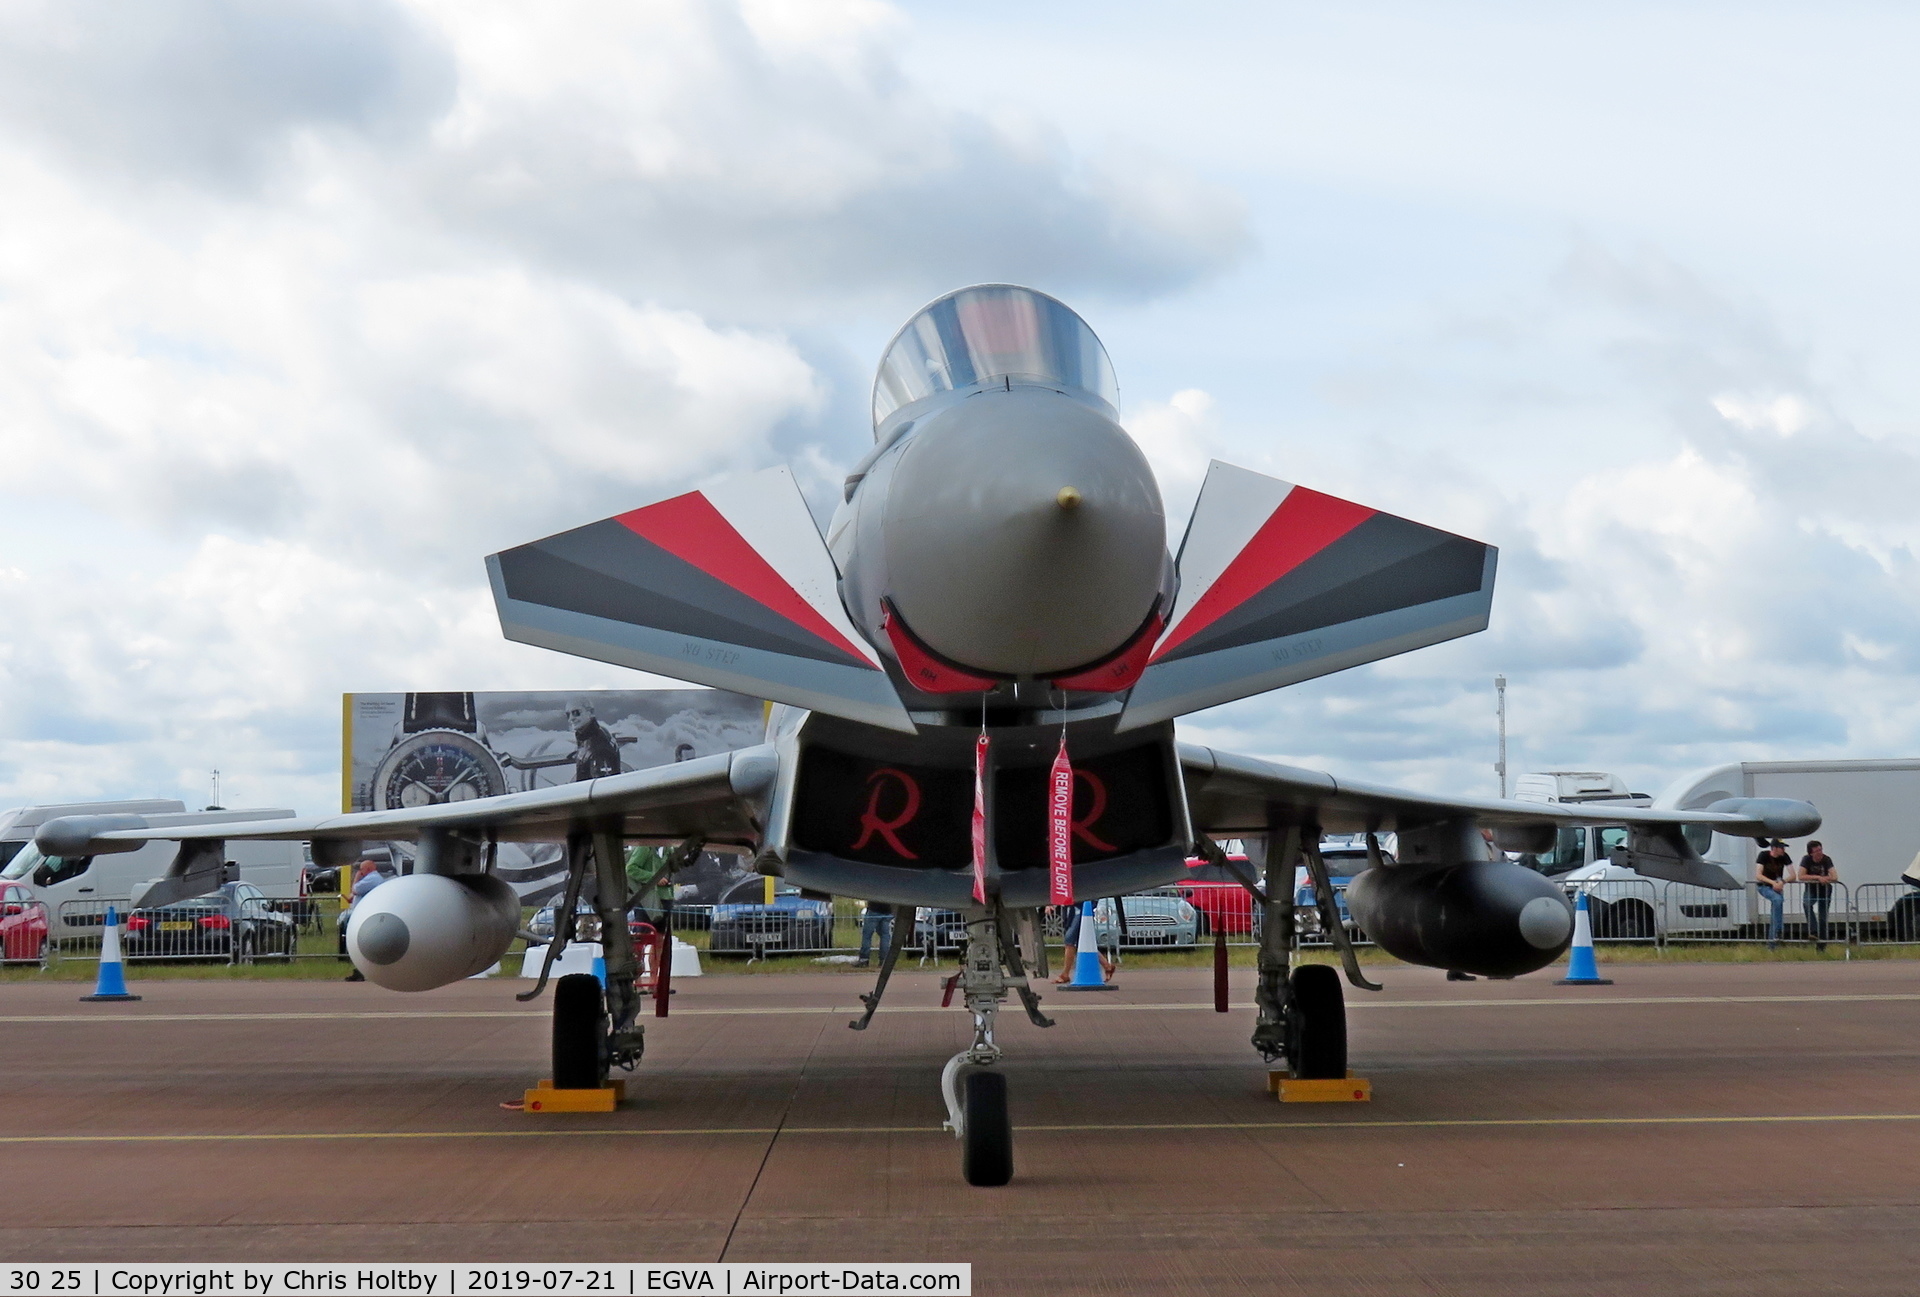 30 25, 2006 Eurofighter EF-2000 Typhoon S C/N 090/GS015, On static display at RIAT 2019 RAF Fairford